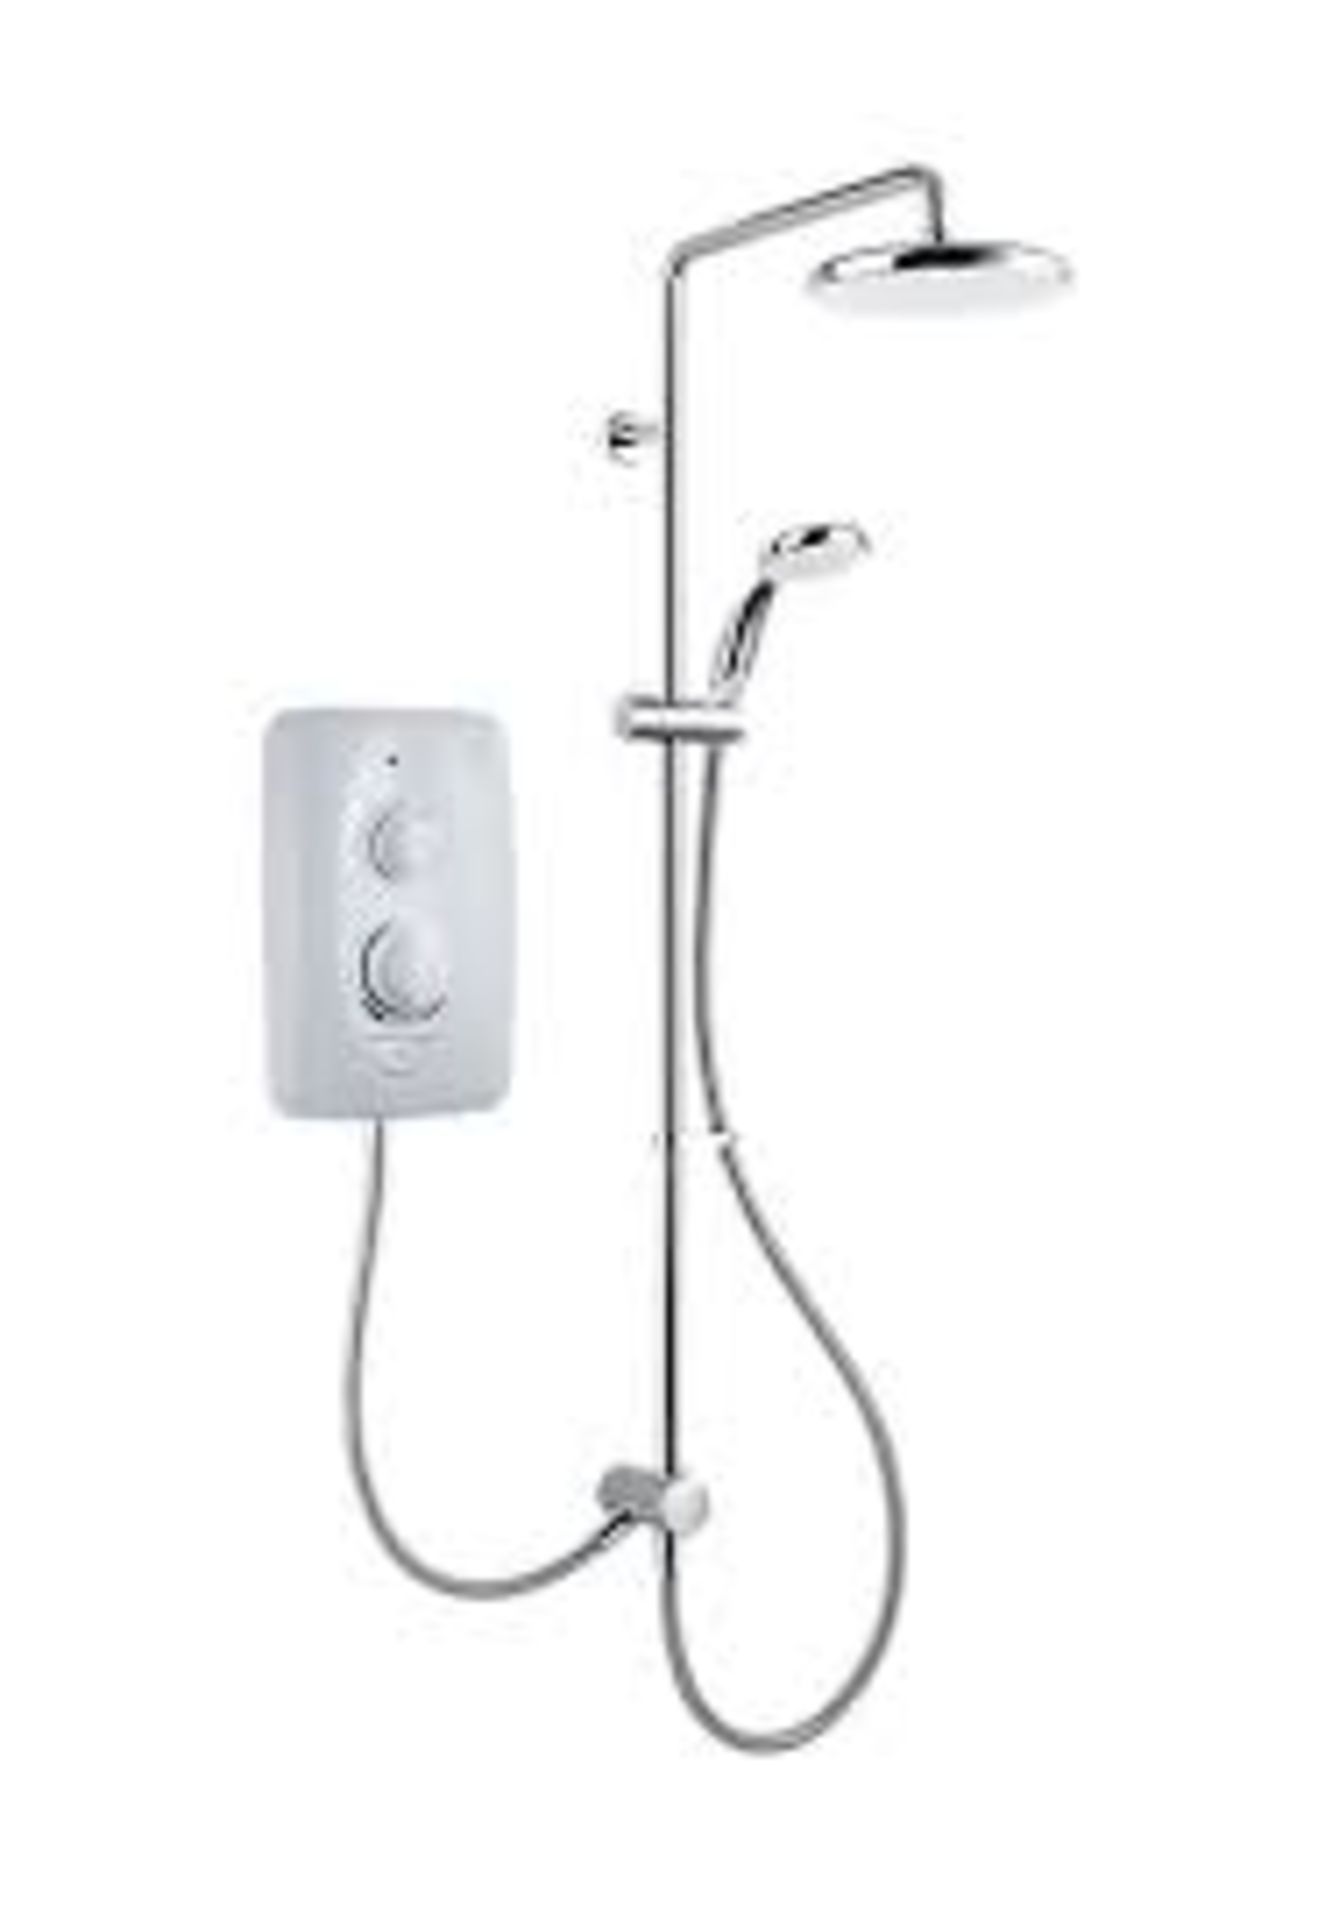 Mira Sprint dual White Chrome effect Electric Shower, 10.8kW. - SR4. Mira Sprint Multi-Fit™ offers a